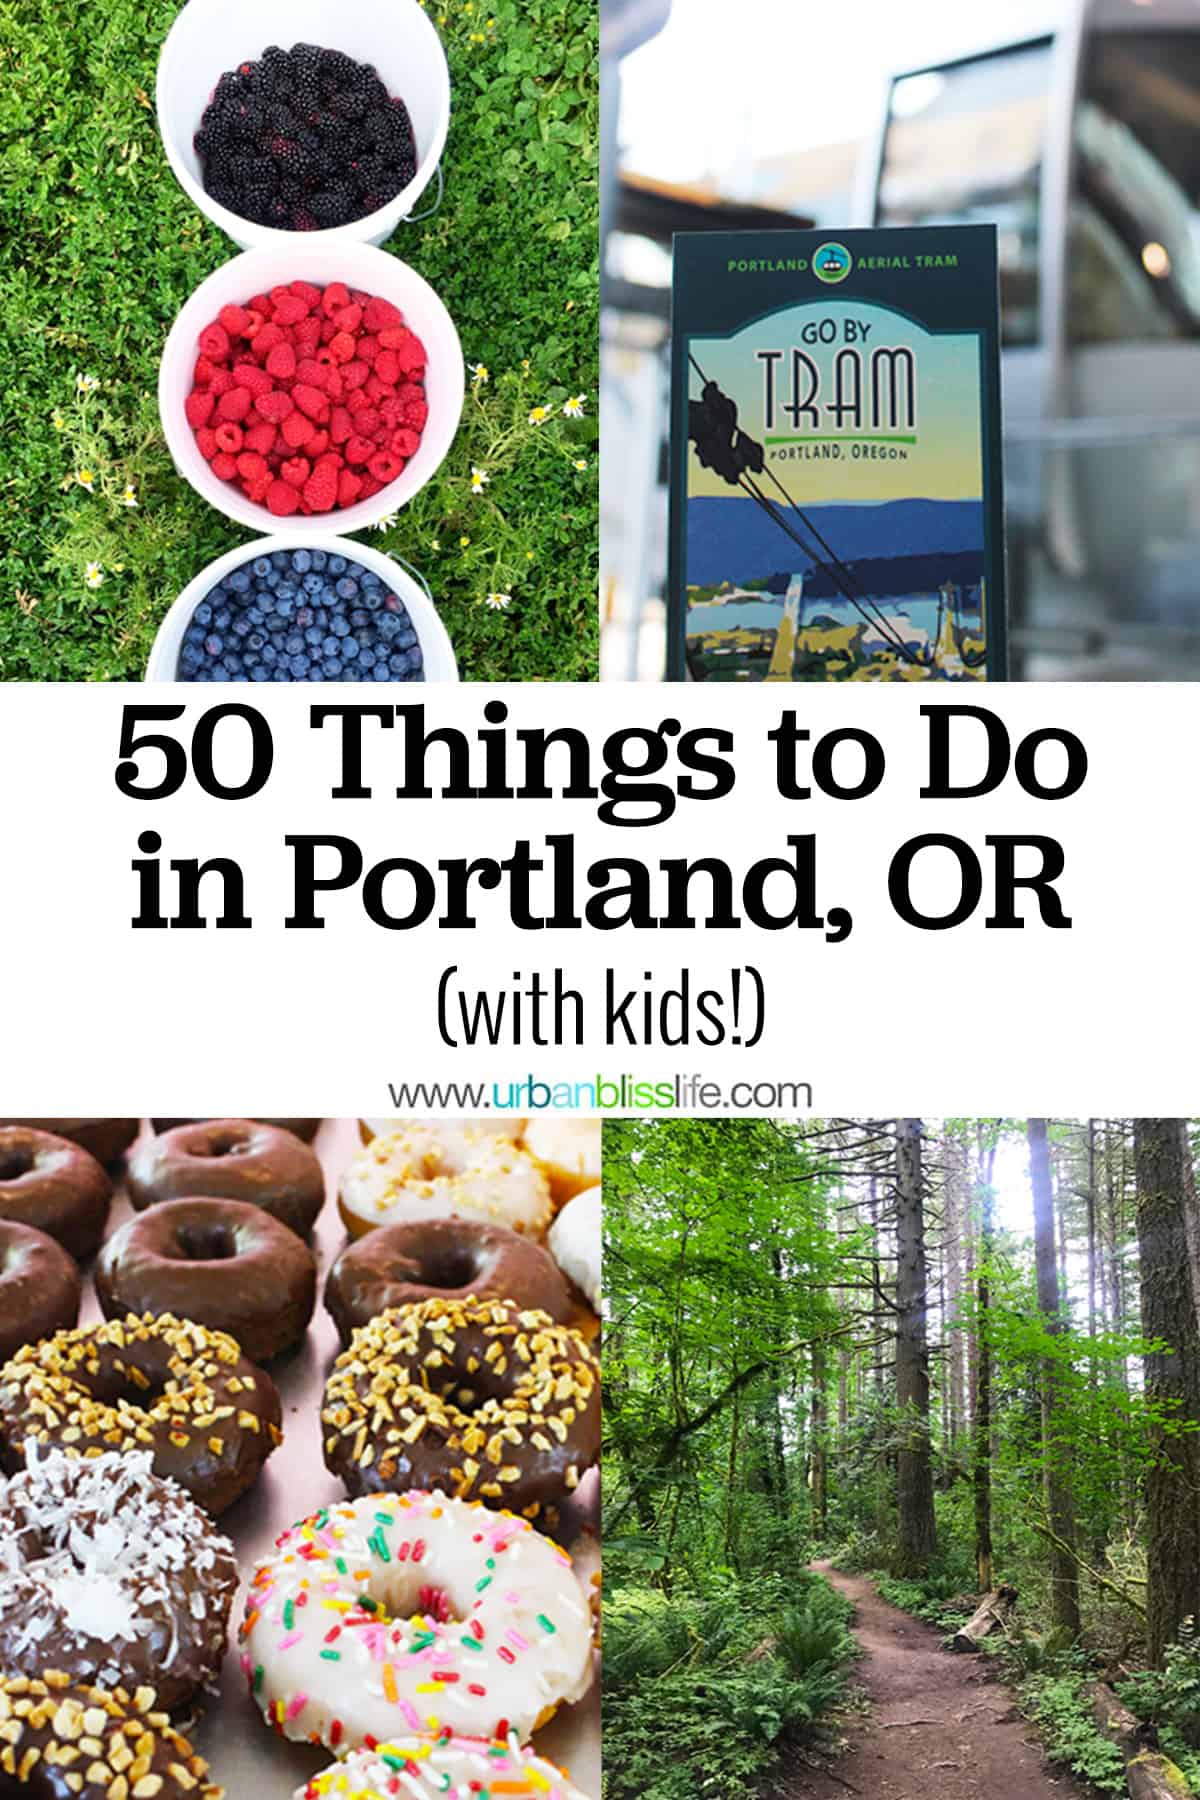 pictures of summer berries, the portland Tram, donuts, and hiking trail with title text that reads "50 Things to do in Portland, OR with Kids."